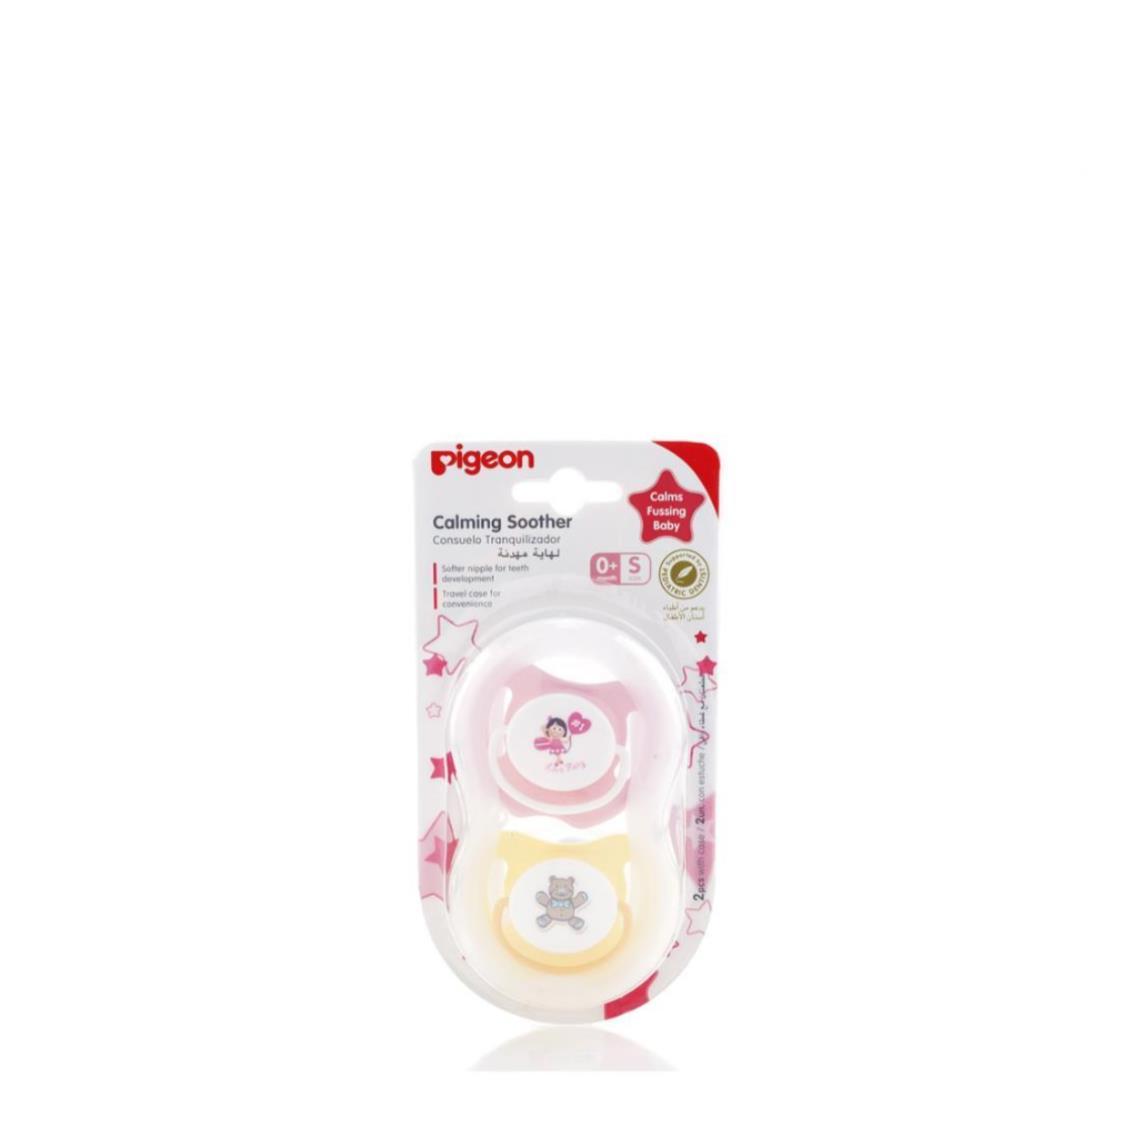 Pigeon Calming Soother 2pcs GirlS Blister